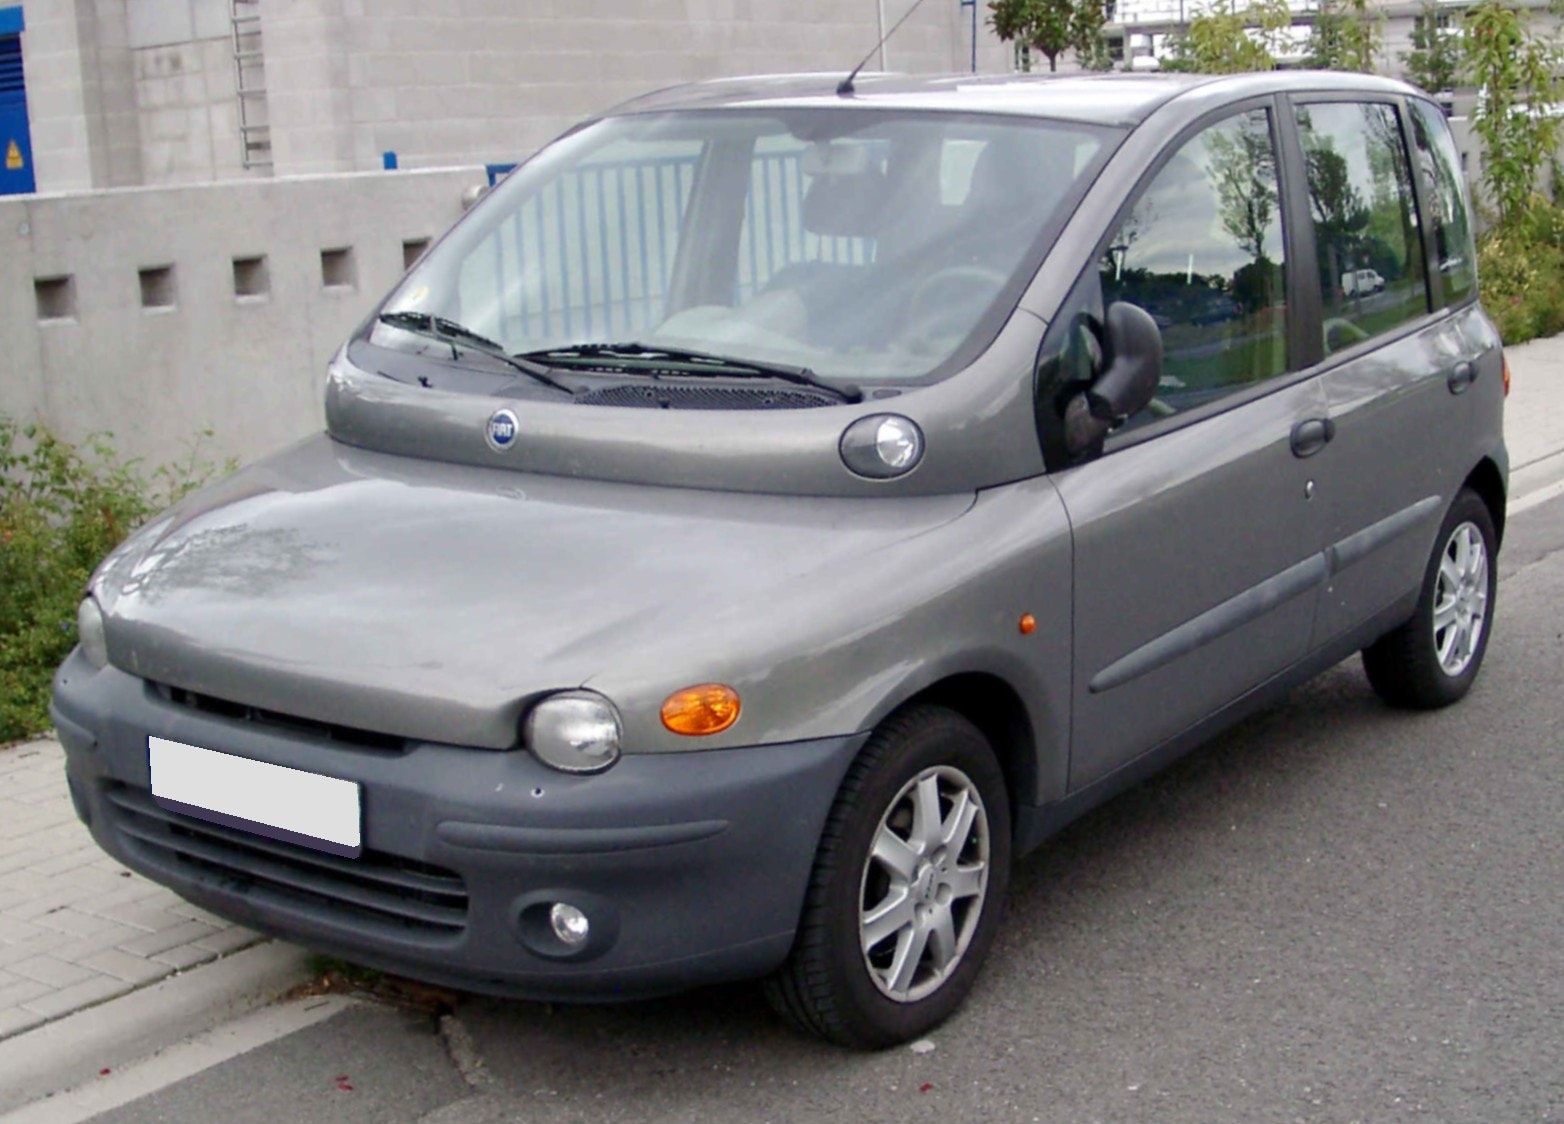 Fiat Multipla on the road